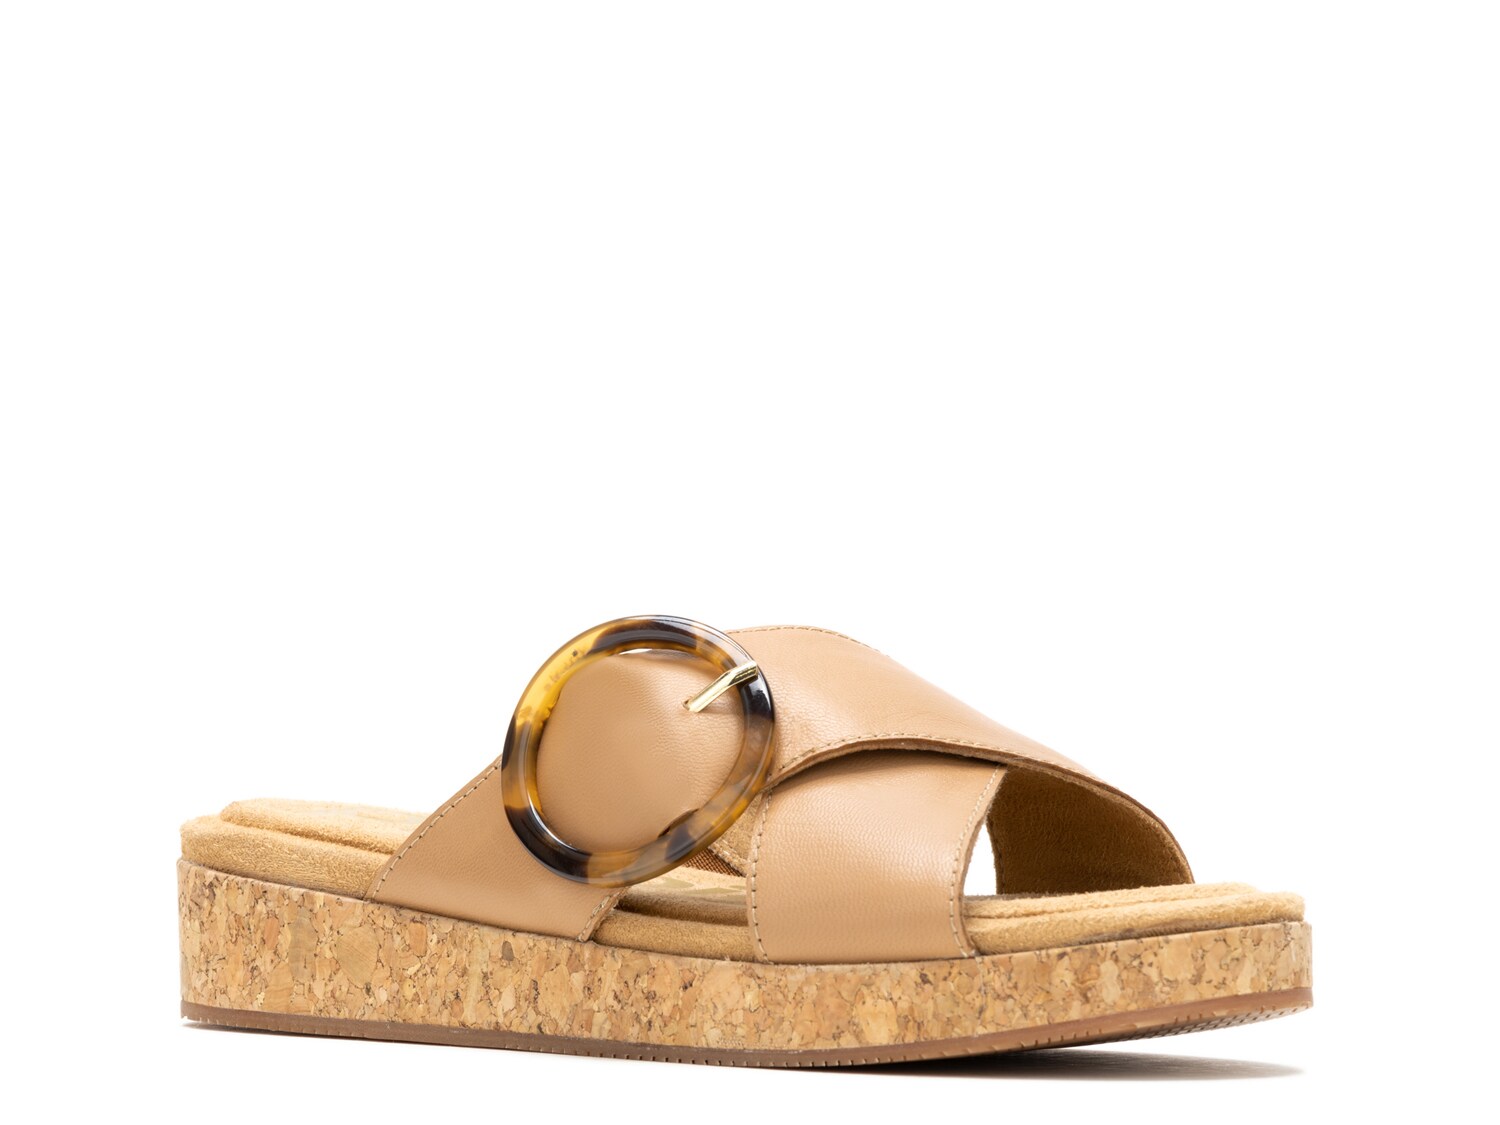 Only 45.00 usd for Hush Puppies Samira Mule Sandals Online at the Shop